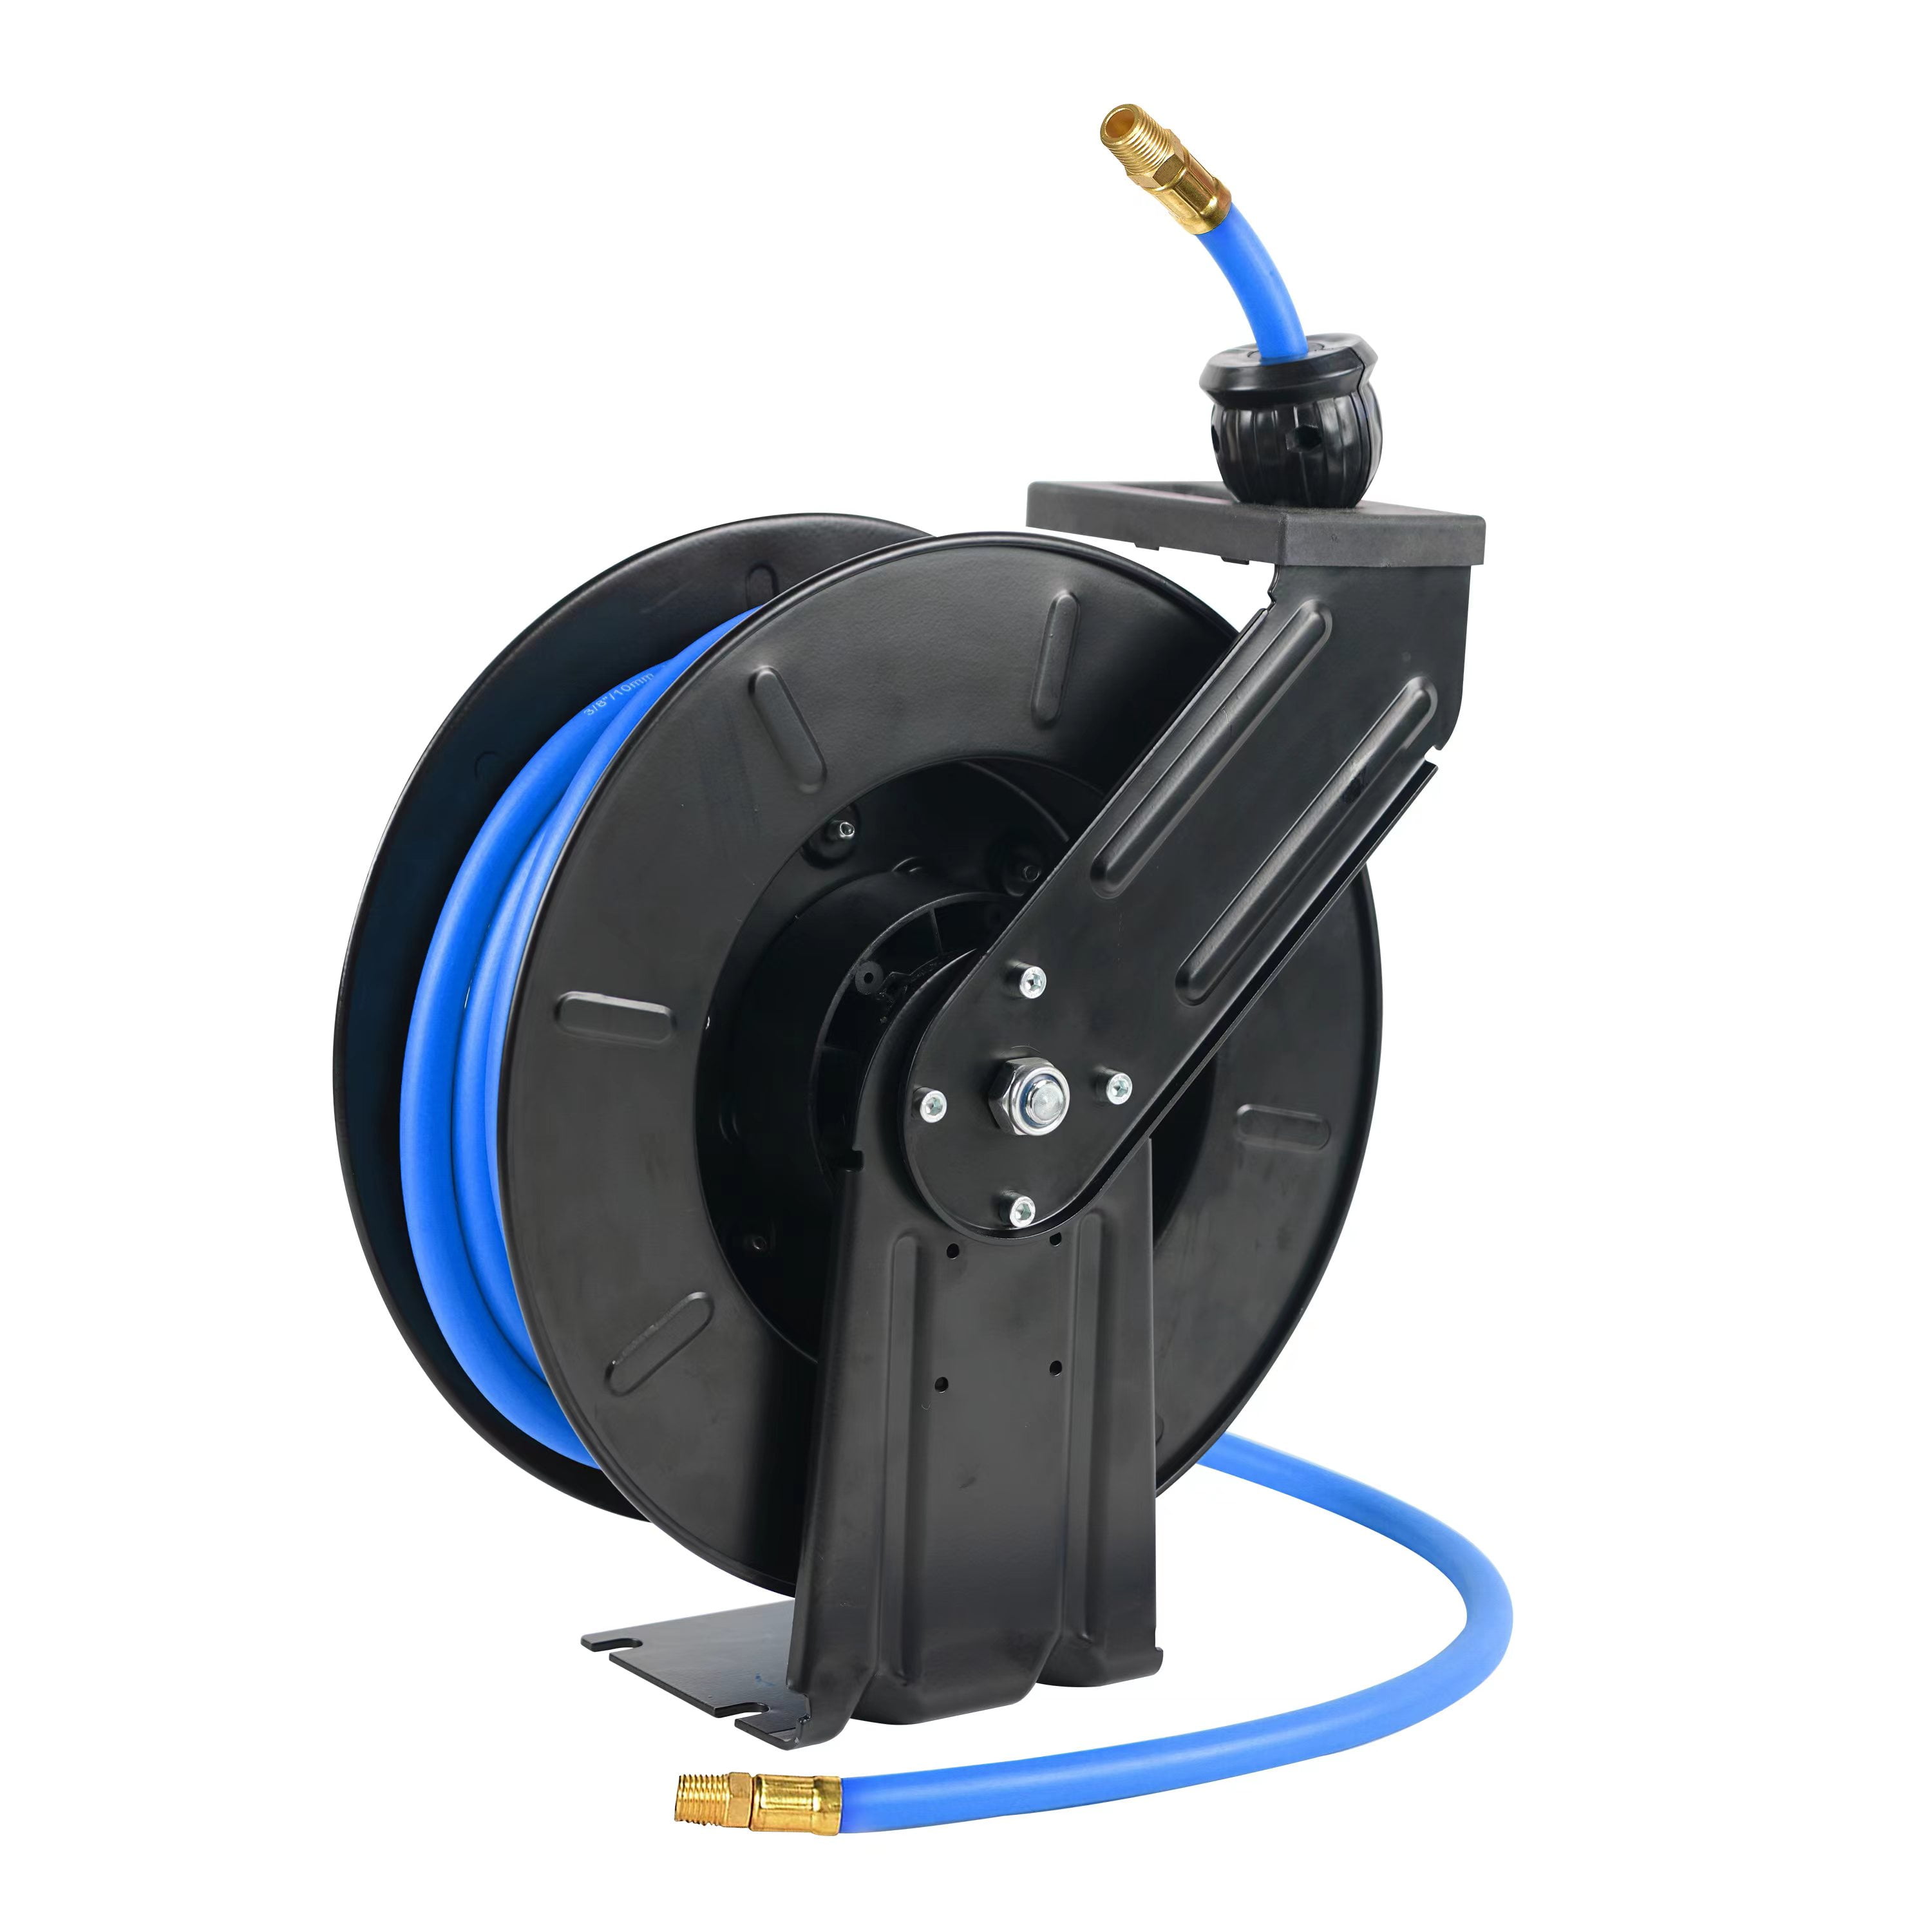 Air Hose Reel, With 3/8 Inch x 50' Ft,,max pressure 300psi,Black and blue  